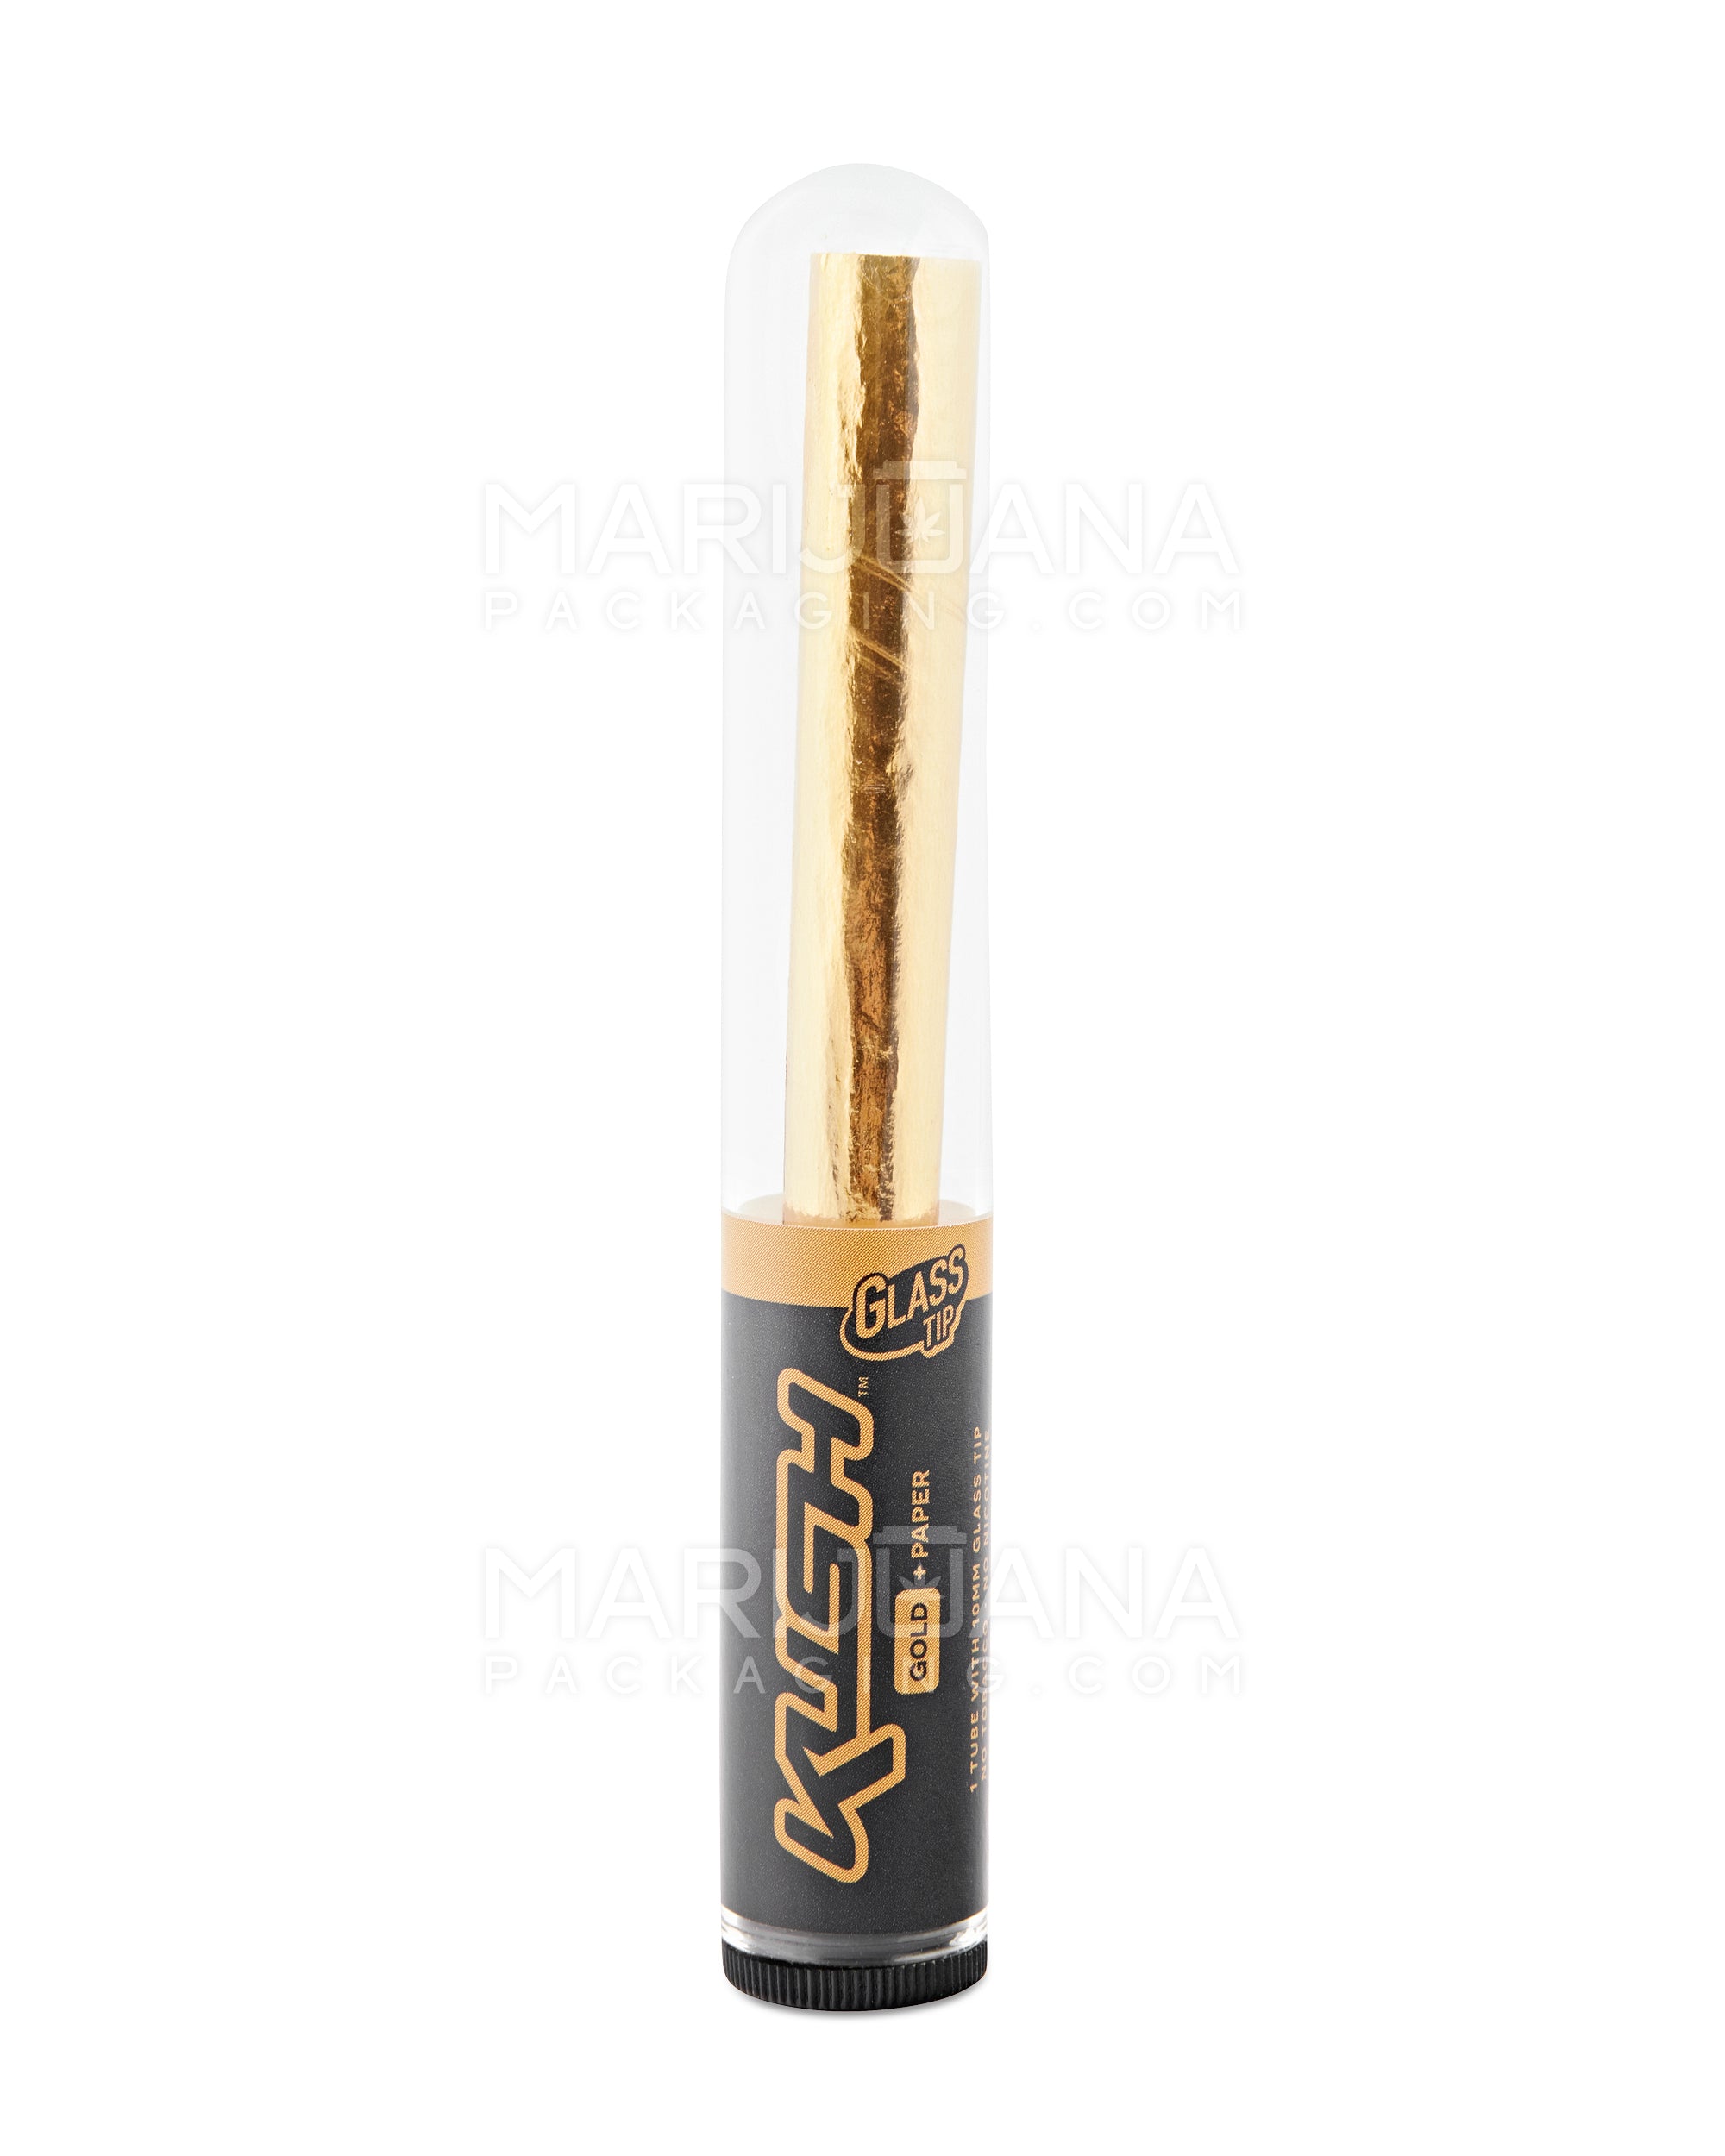 KUSH | 'Retail Display' 24K Gold King Size Paper Pre Rolled Cones w/ Glass Filter Tip | 109mm - Edible Gold - 8 Count